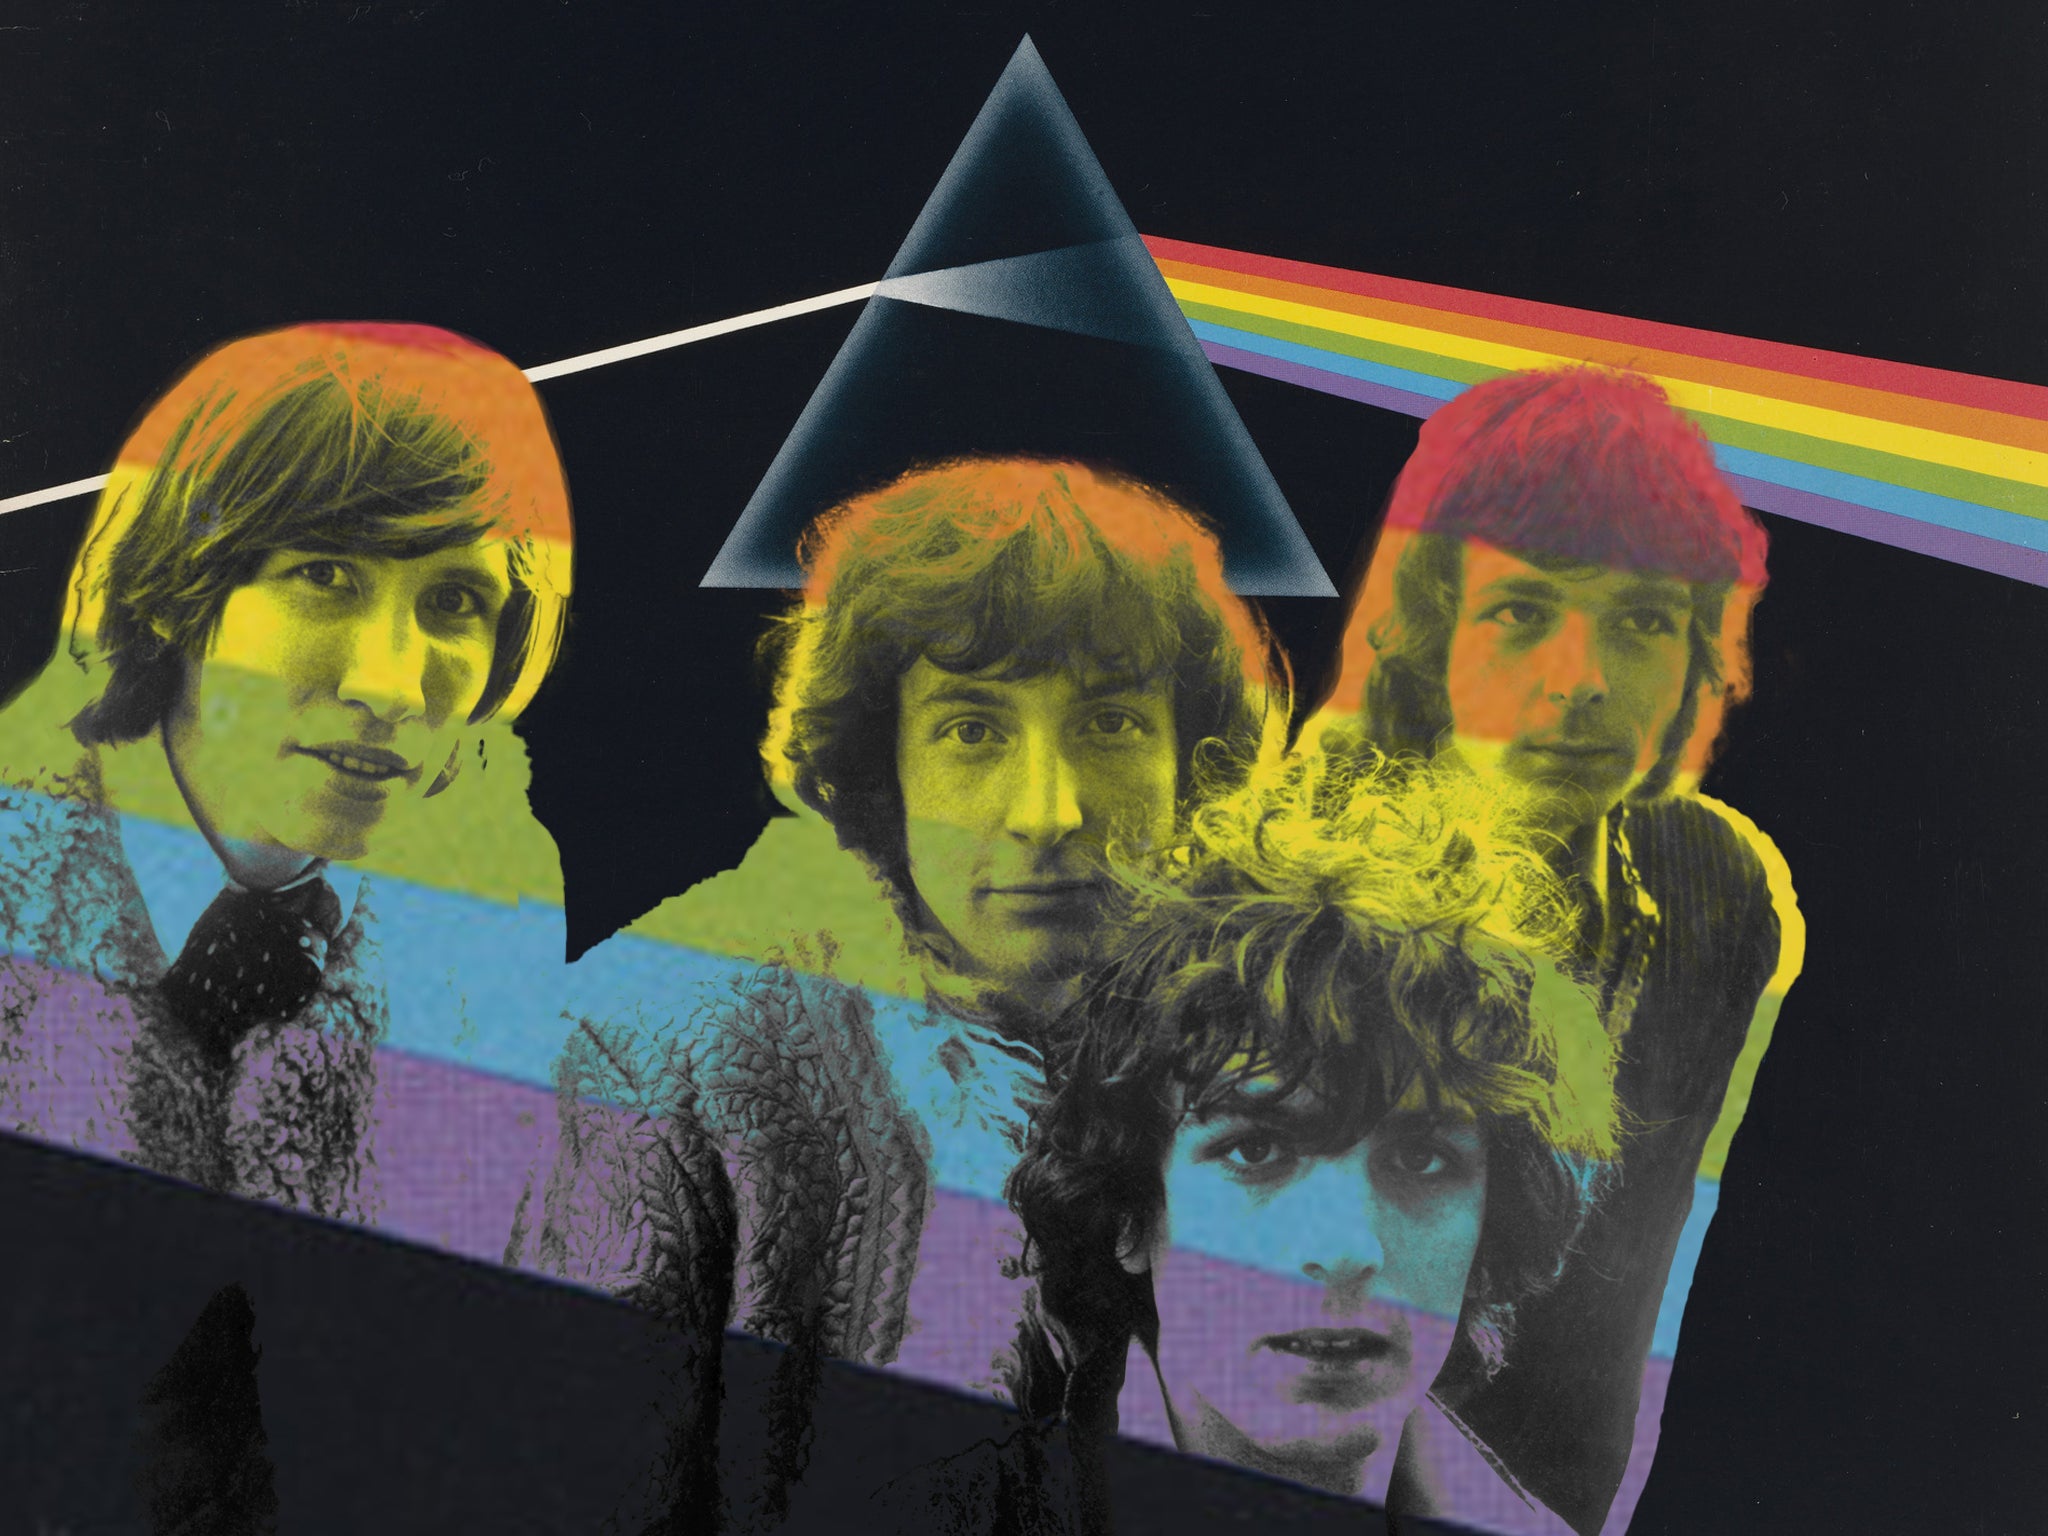 Pink Floyd song reconstructed from person's brain activity | The ...